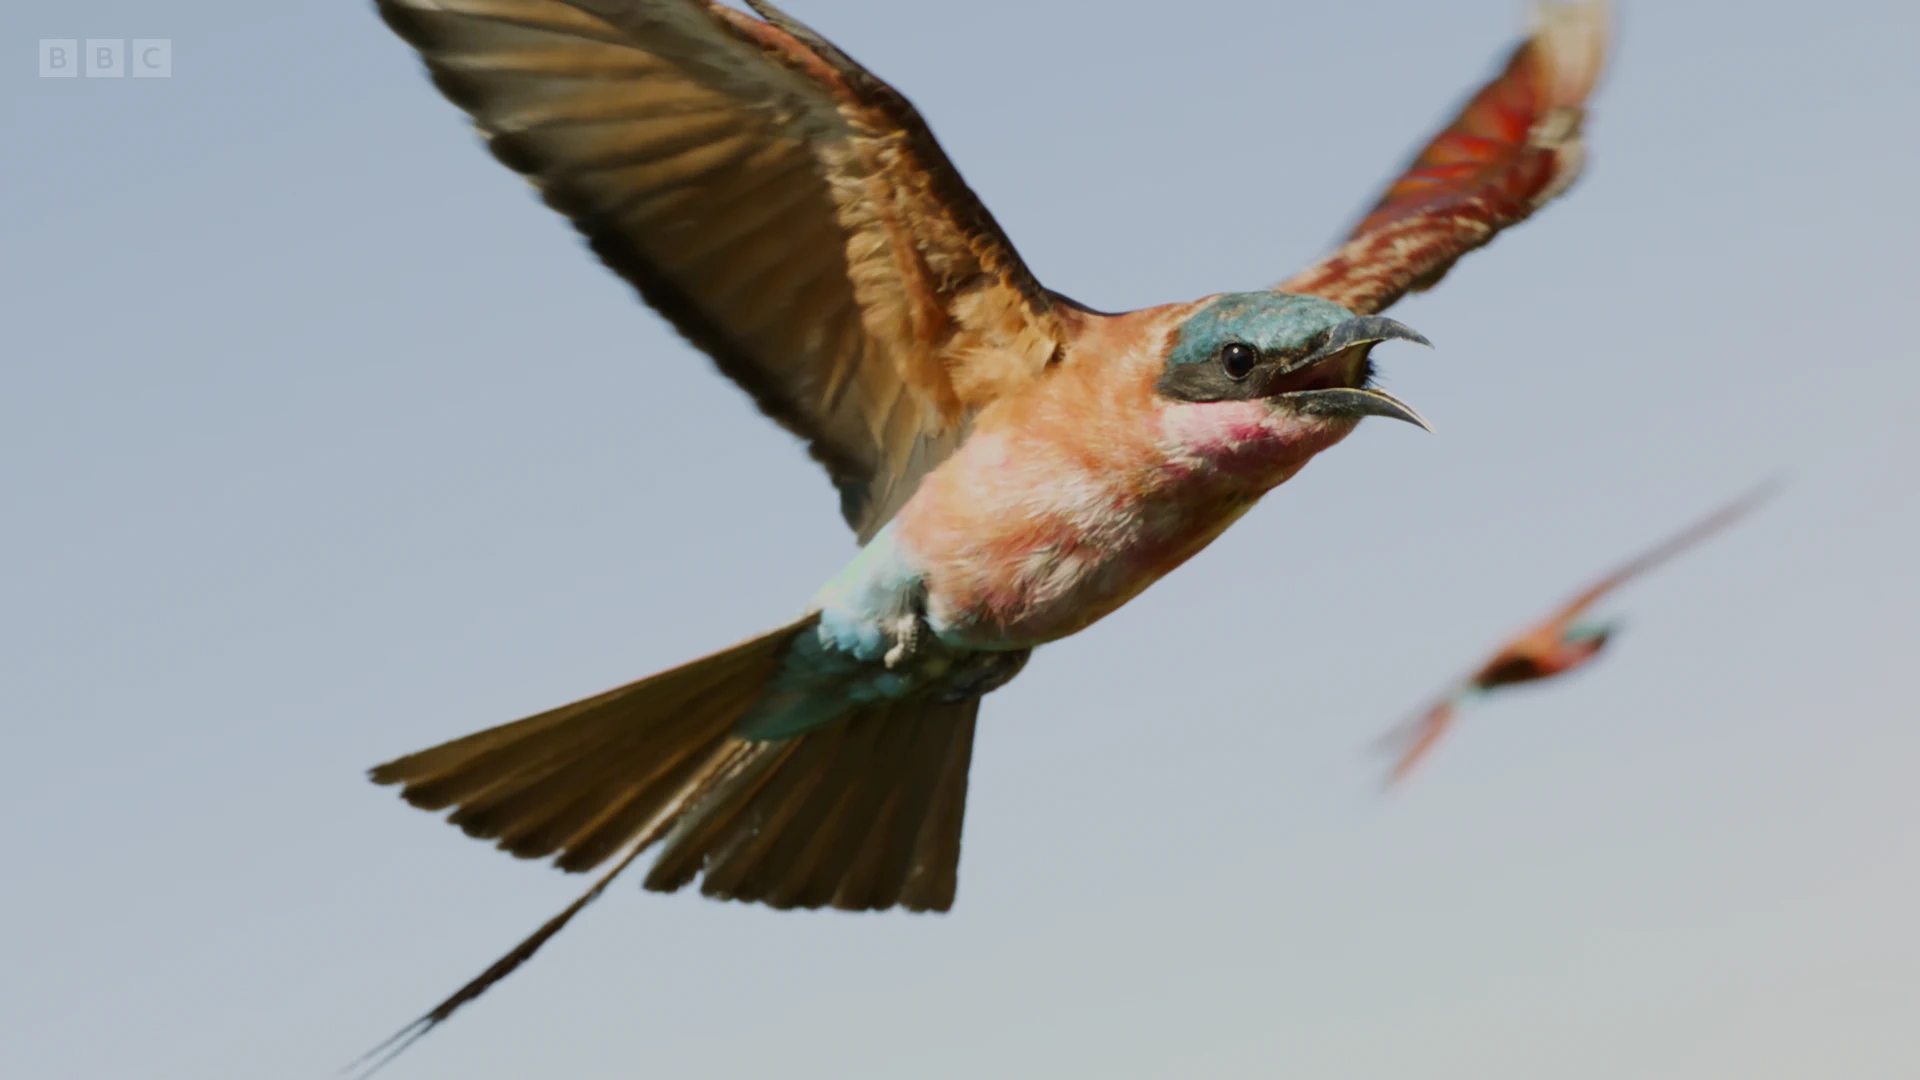 Southern carmine bee-eater (Merops nubicoides) as shown in Planet Earth II - Grasslands